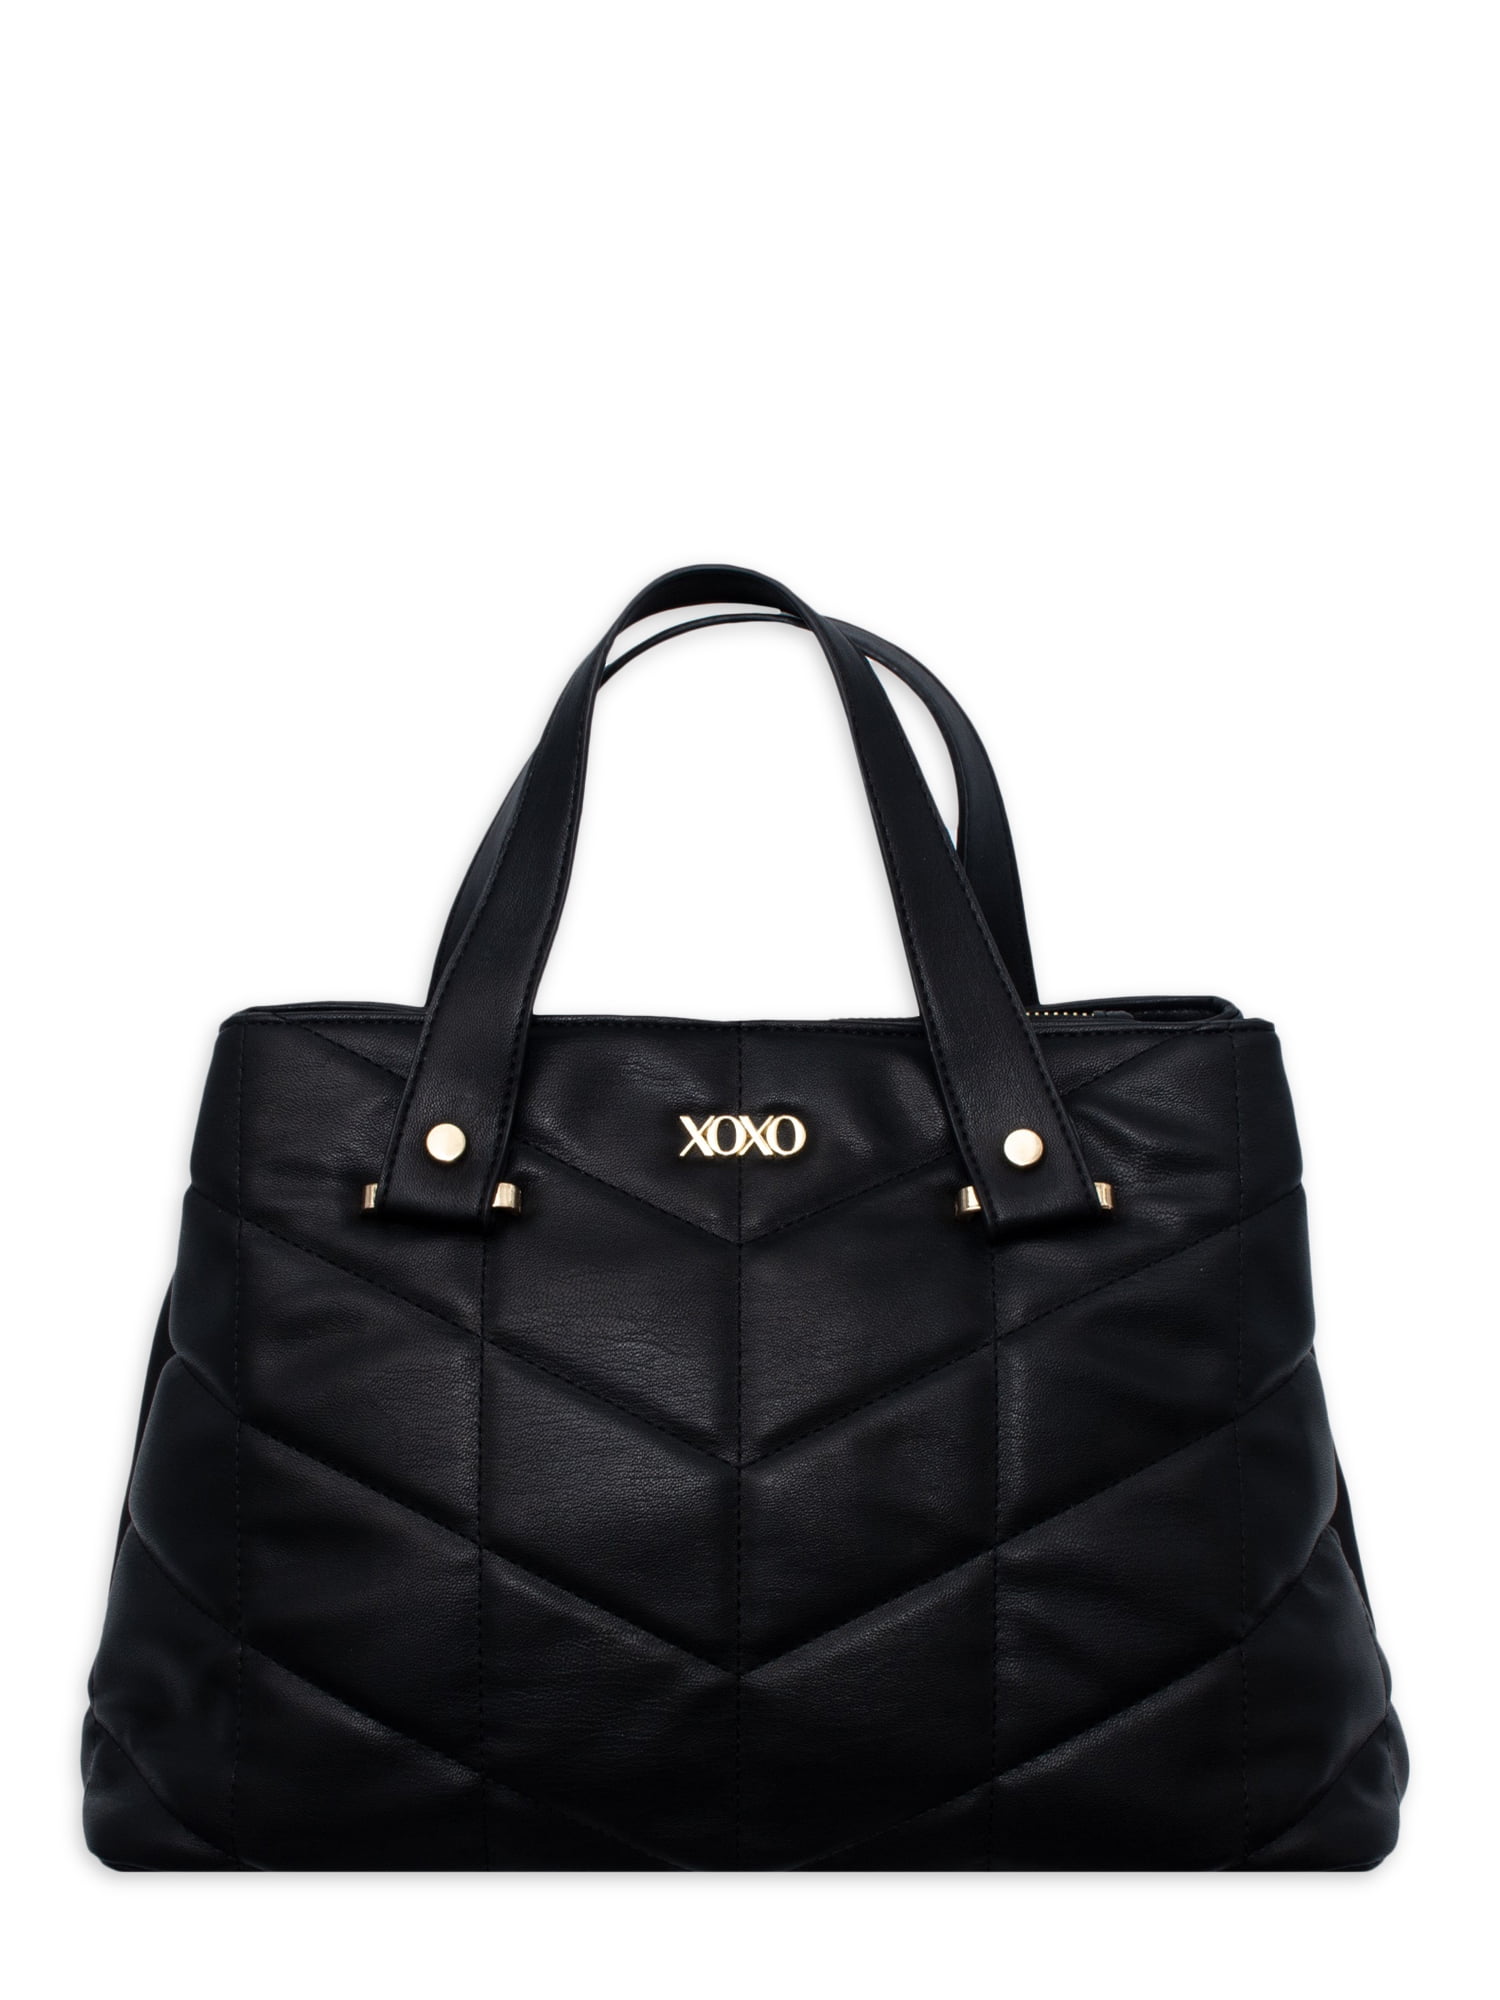 XOXO Women's Black Vegan Leather Quilted Tote Bag With Chain